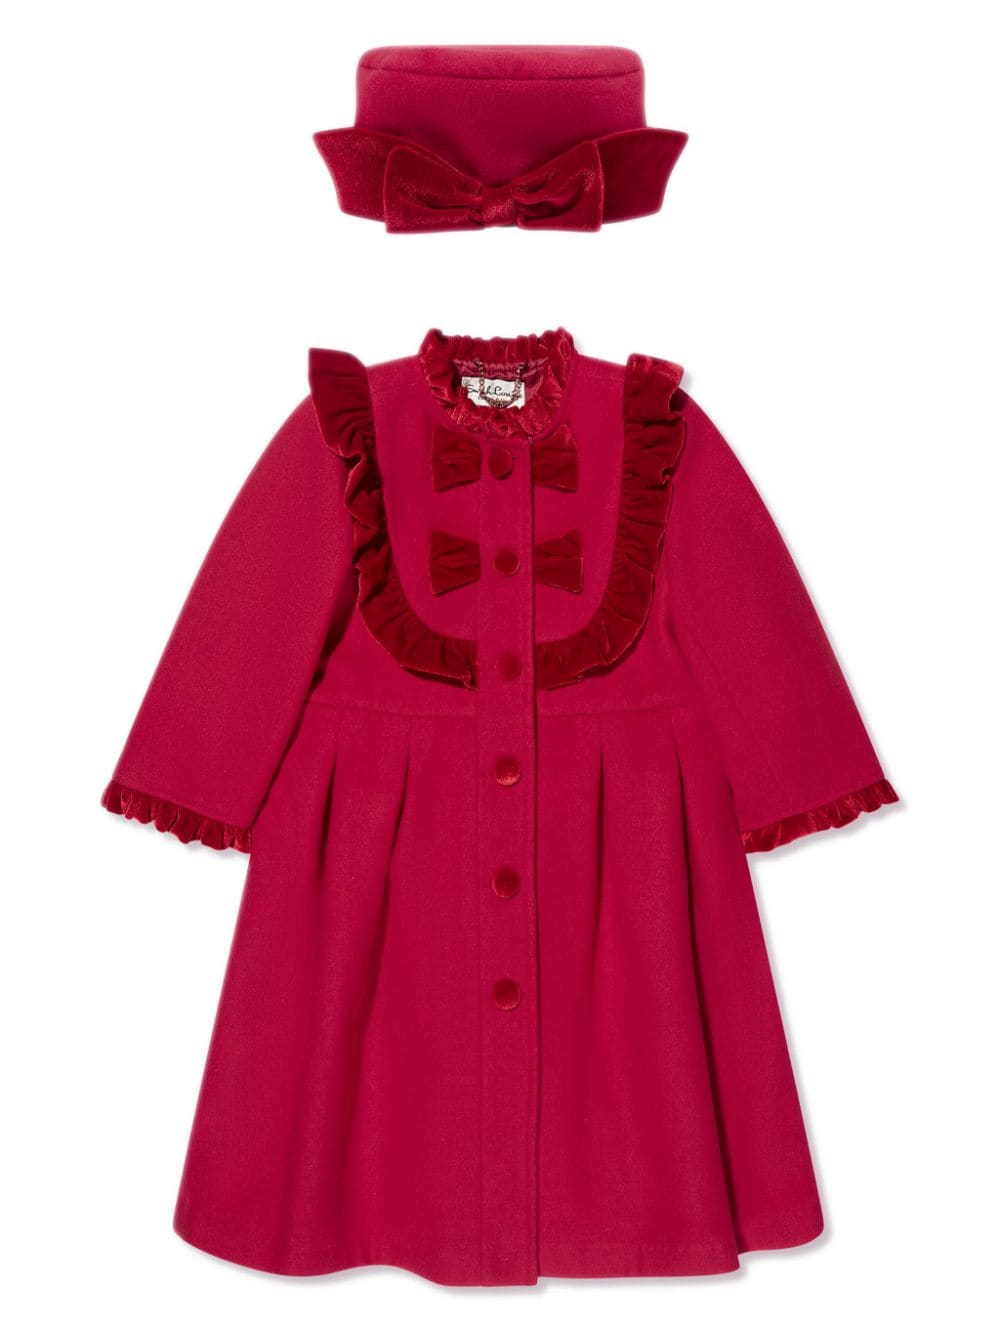 Sarah Louise ruffled-trim bow single-breasted coat - Red von Sarah Louise